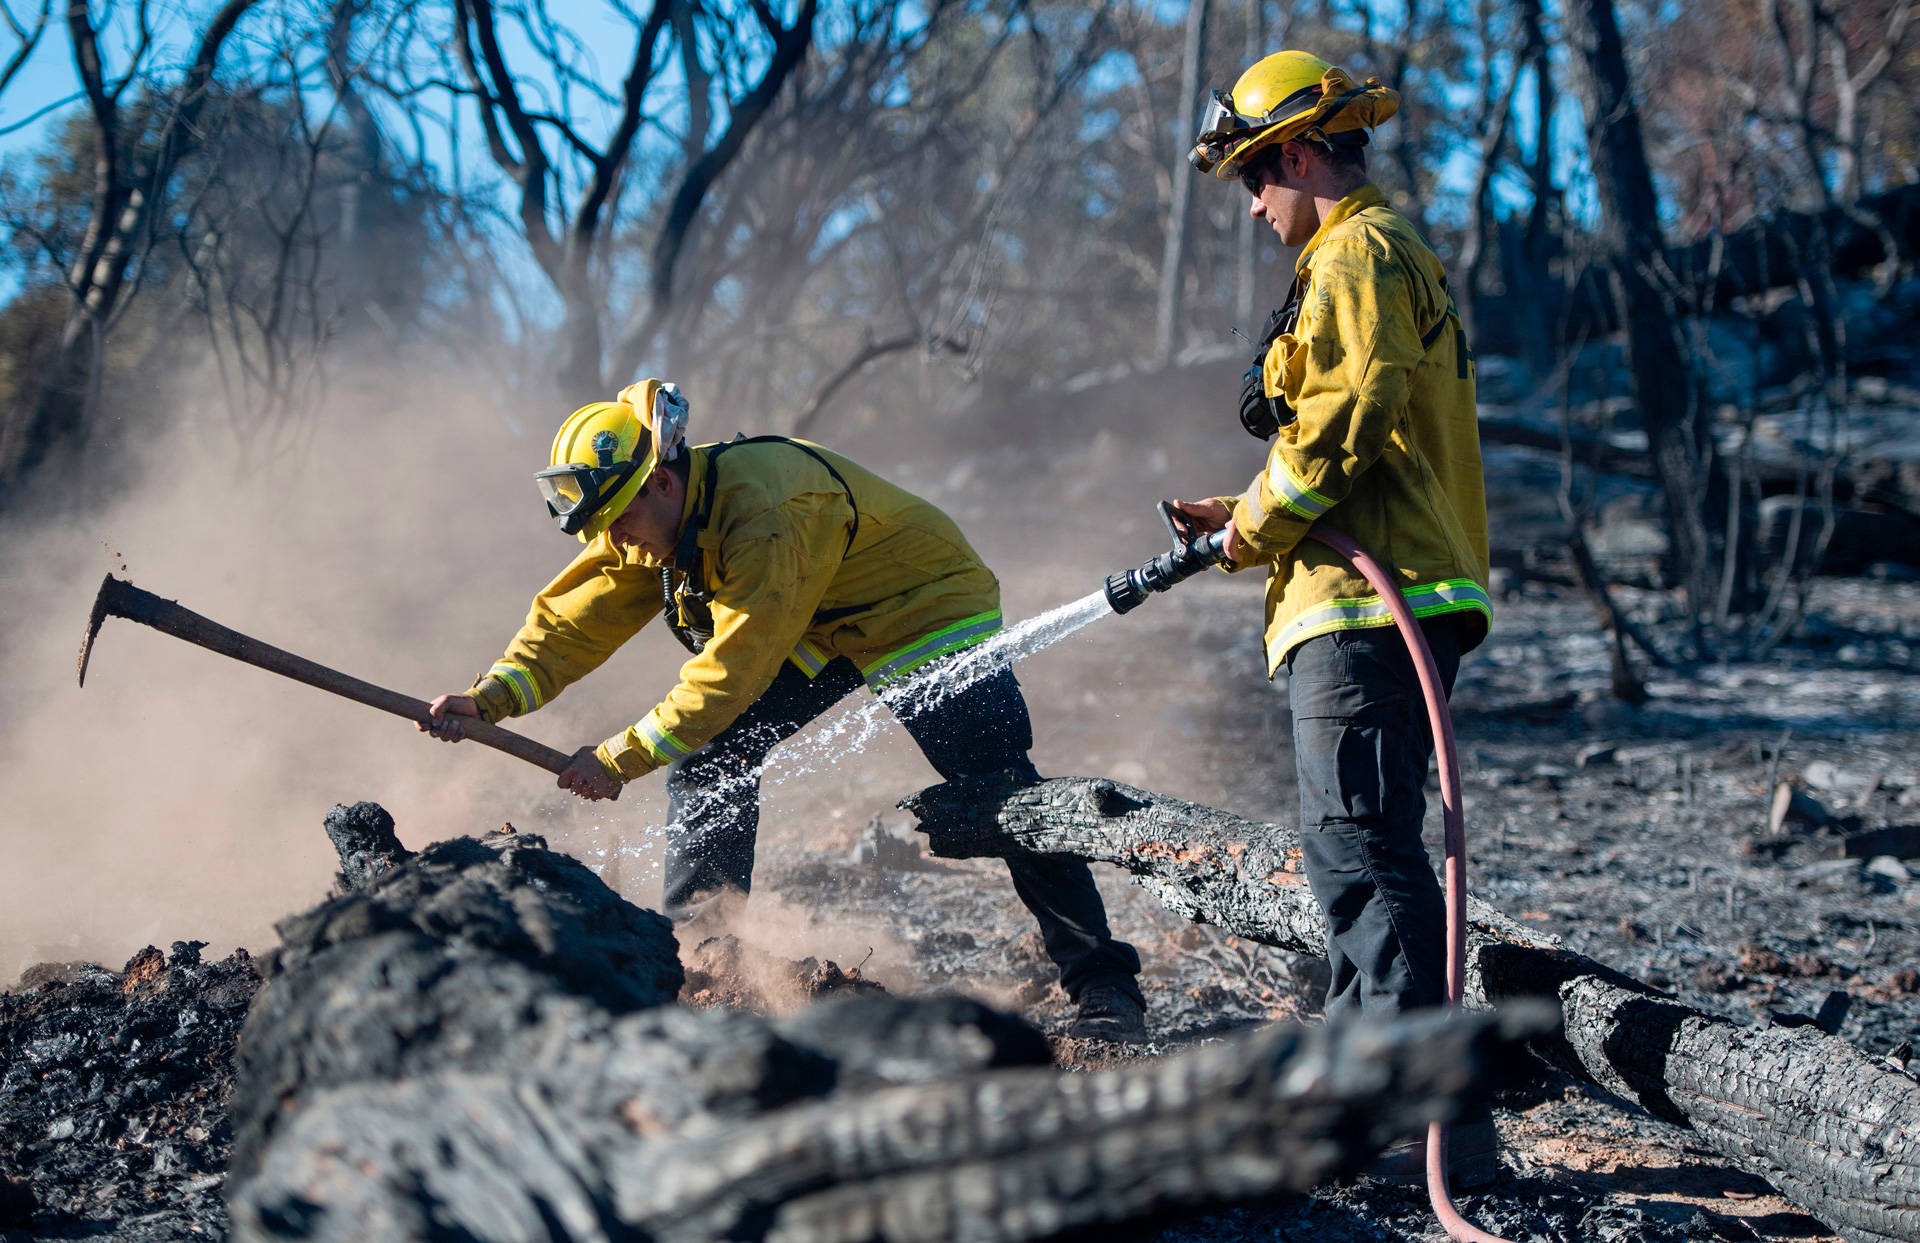 Bryce Briare (R) and Mike Manibusan (L) with the Marin County Fire Deptartment work on a smoldering hot spot as firefighters continue to build toward containment of the Wall Fire in Oroville on July 10, 2017.  JOSH EDELSON/AFP/Getty Images